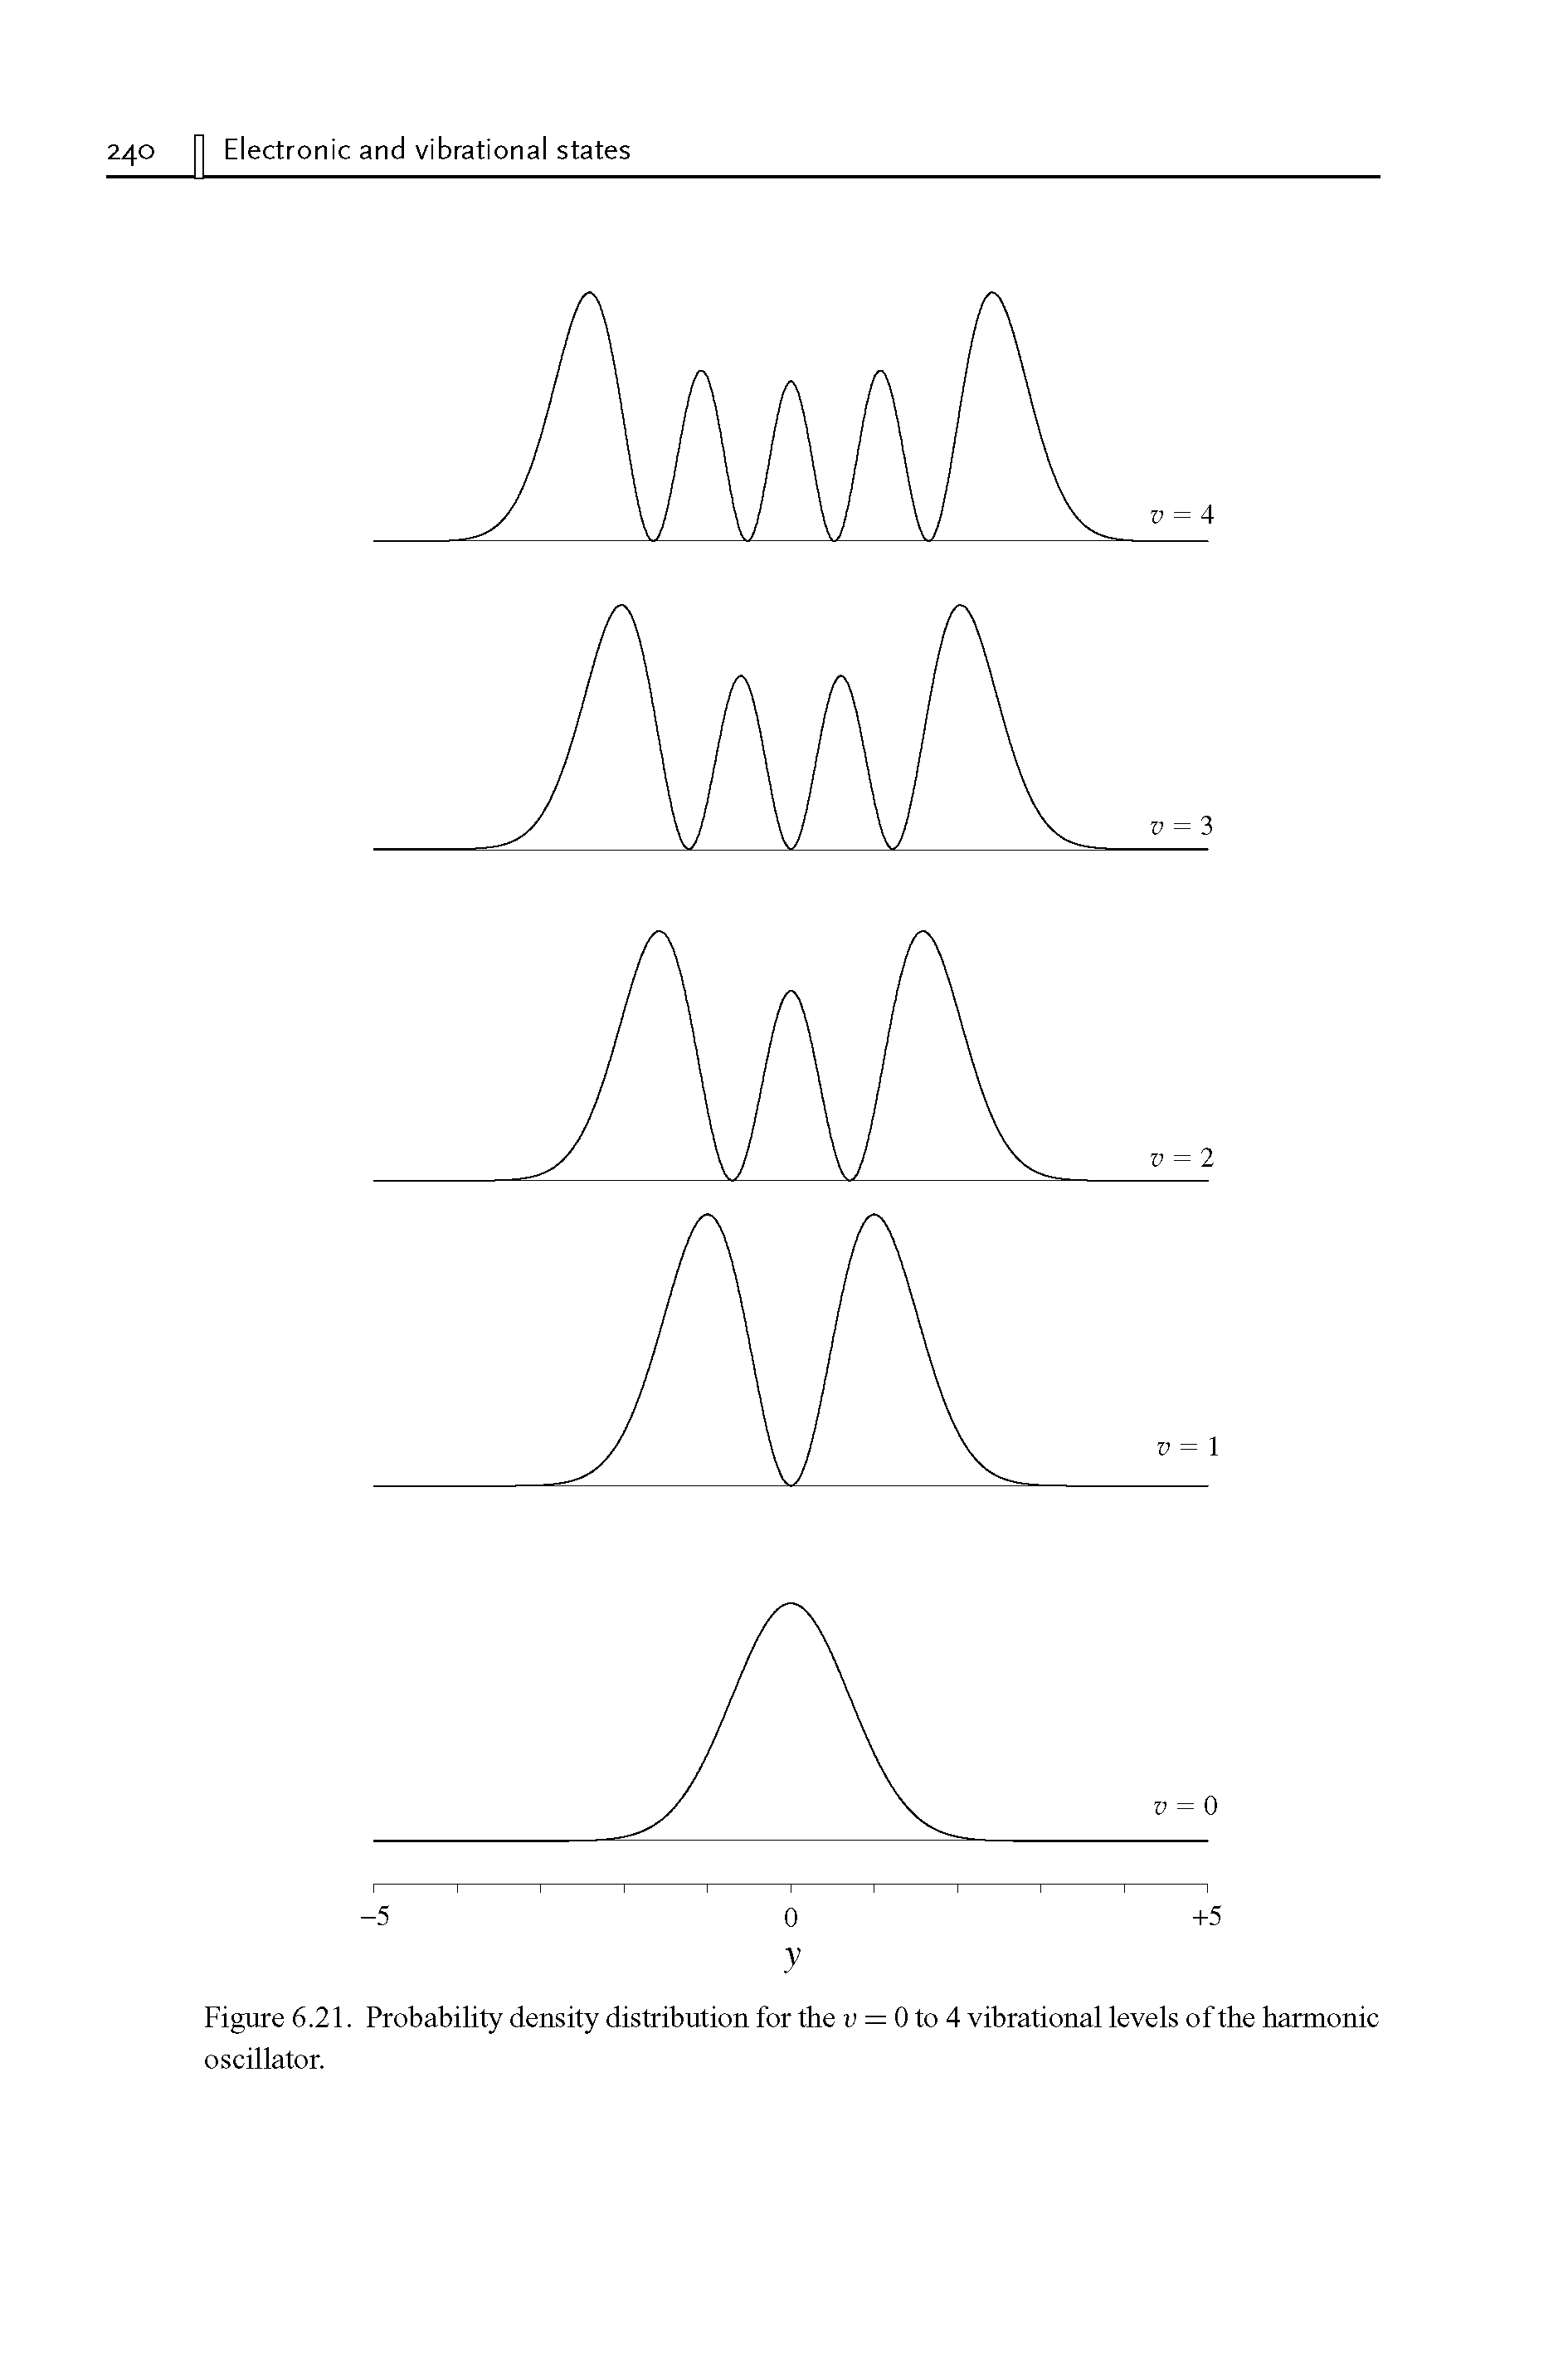 Figure 6.21. Probability density distribution for the v = 0 to 4 vibrational levels of the harmonic oscillator.